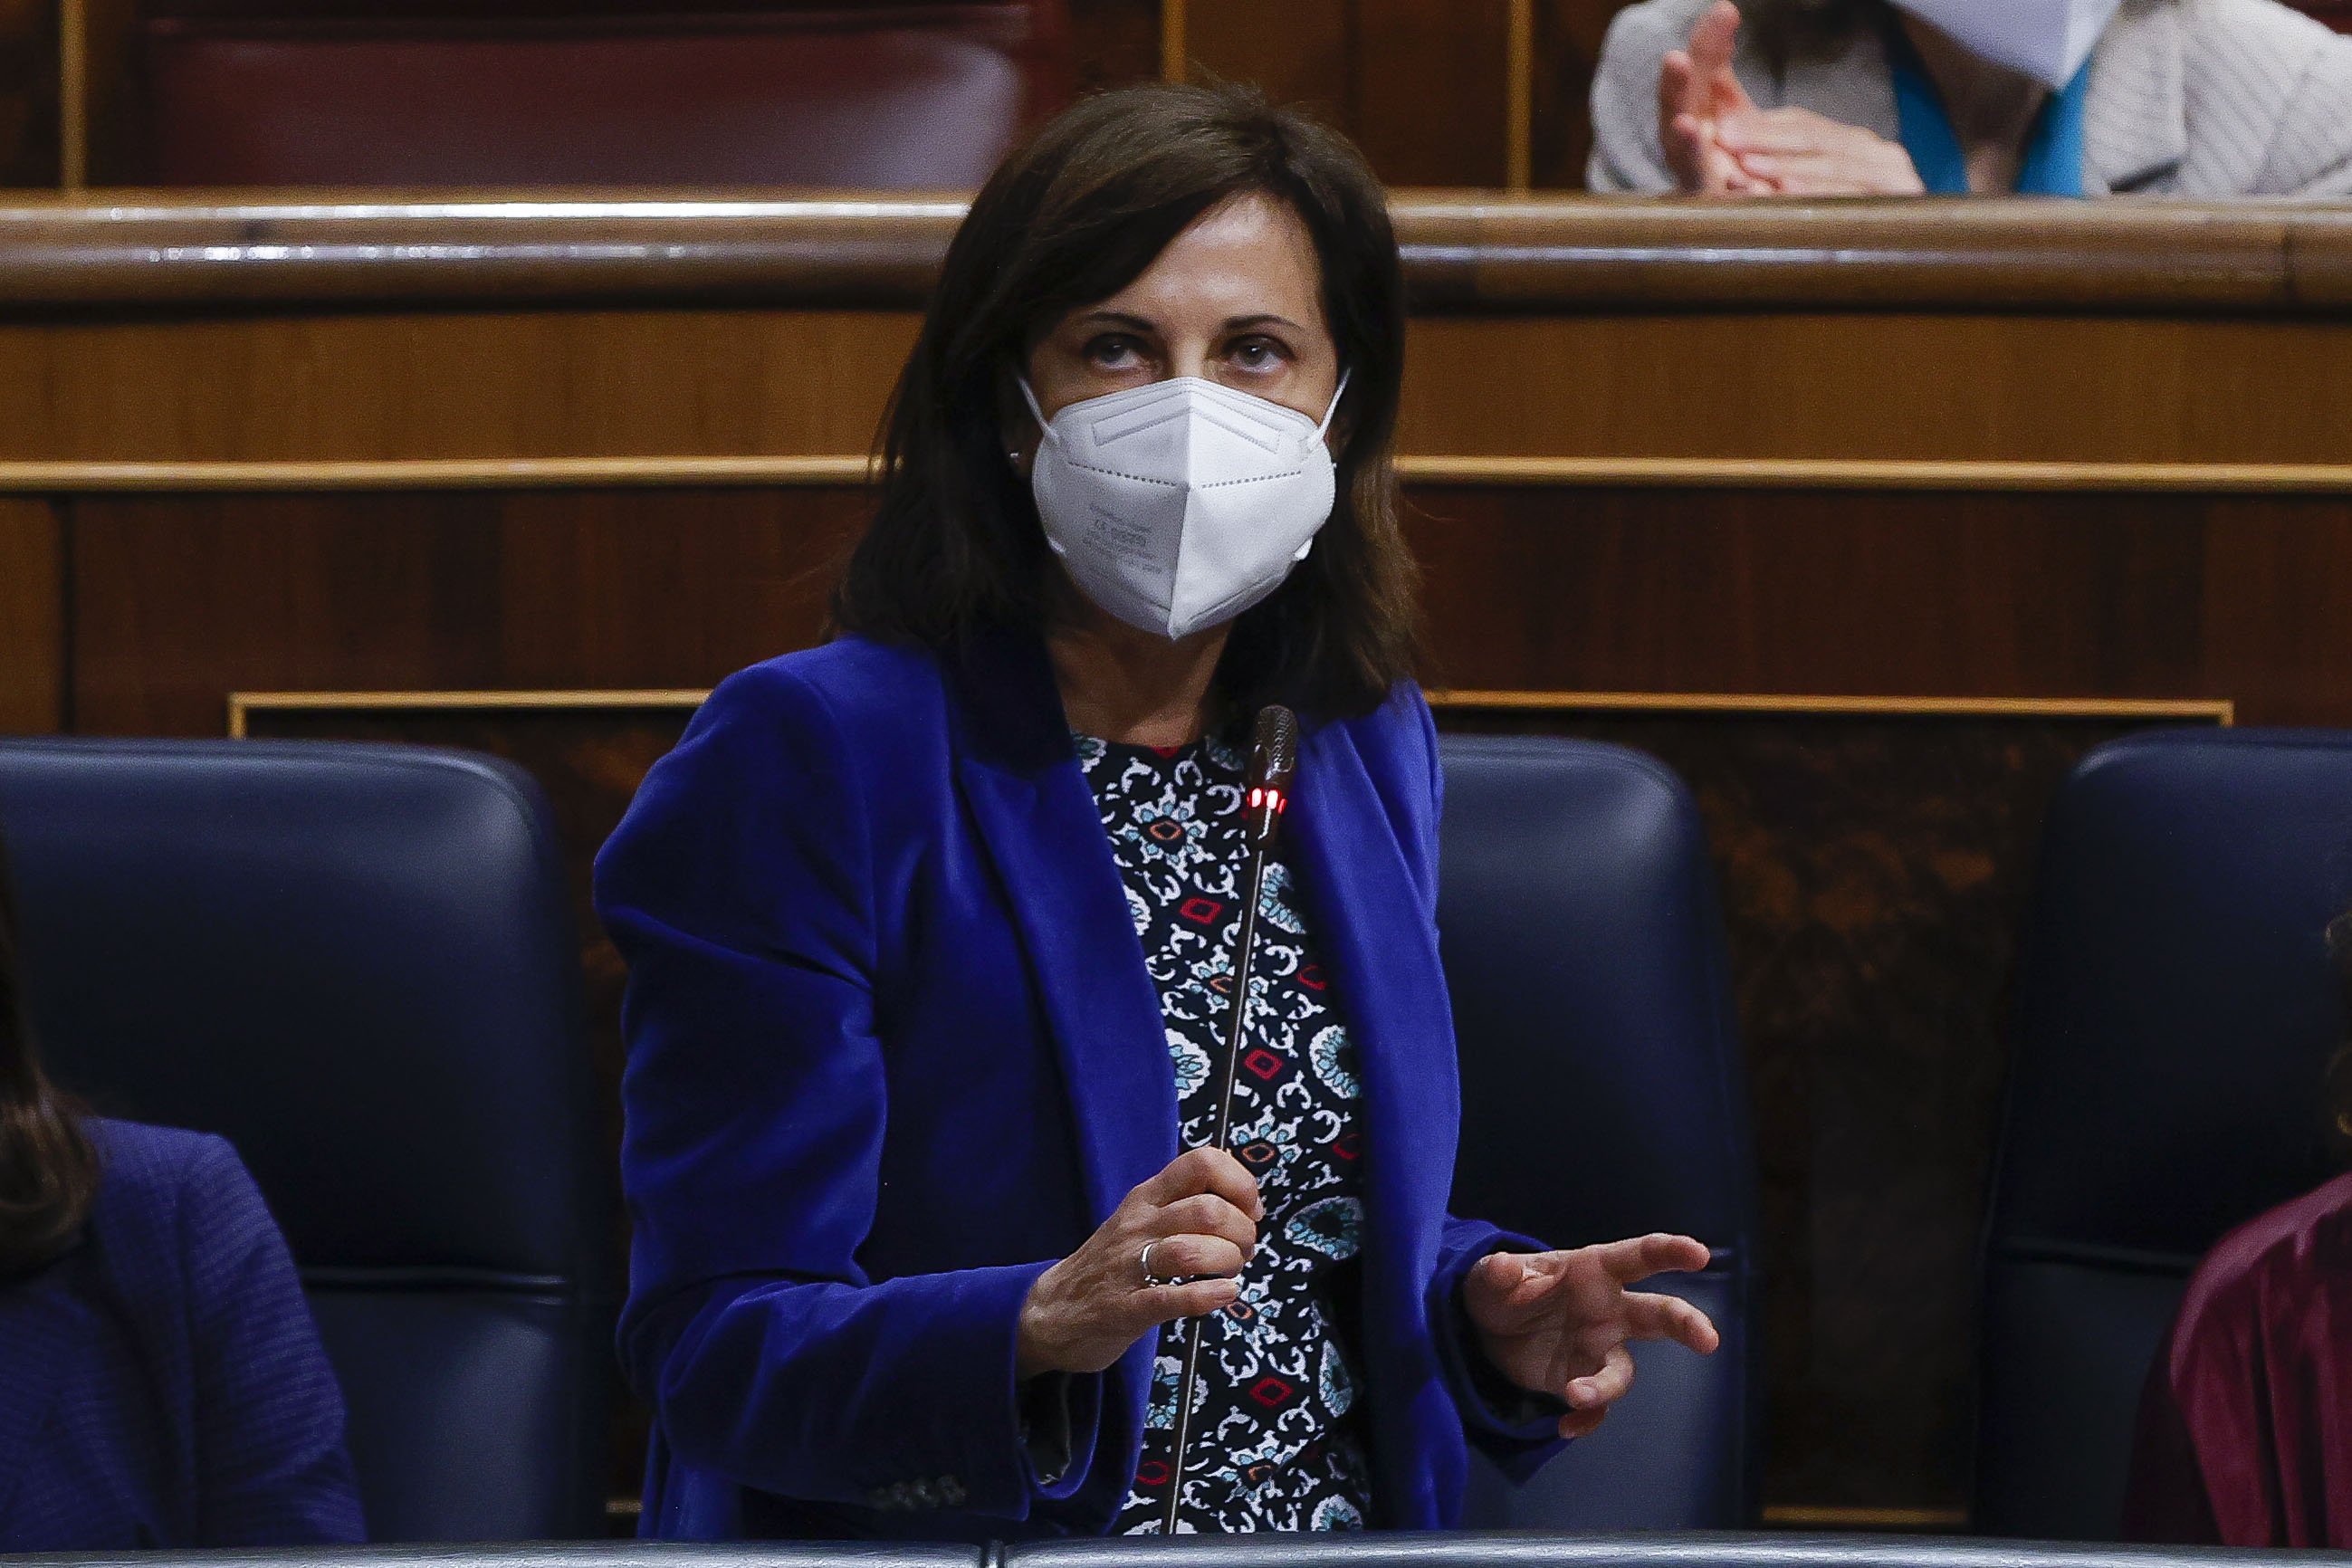 Minister justifies CatalanGate: "What do you do when someone declares independence?"